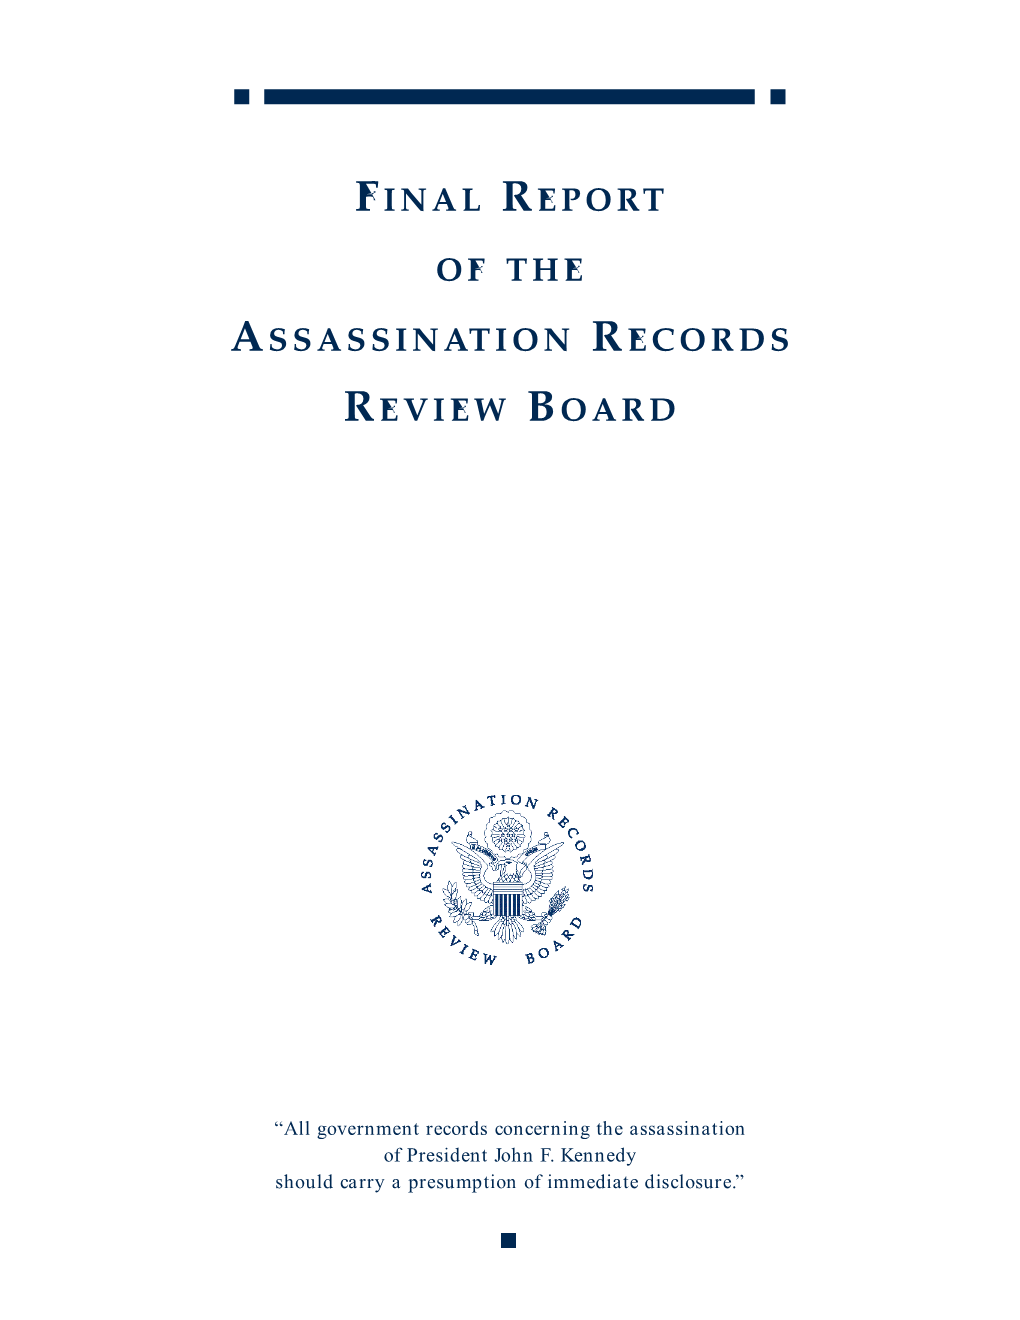 Final Report of the ARRB